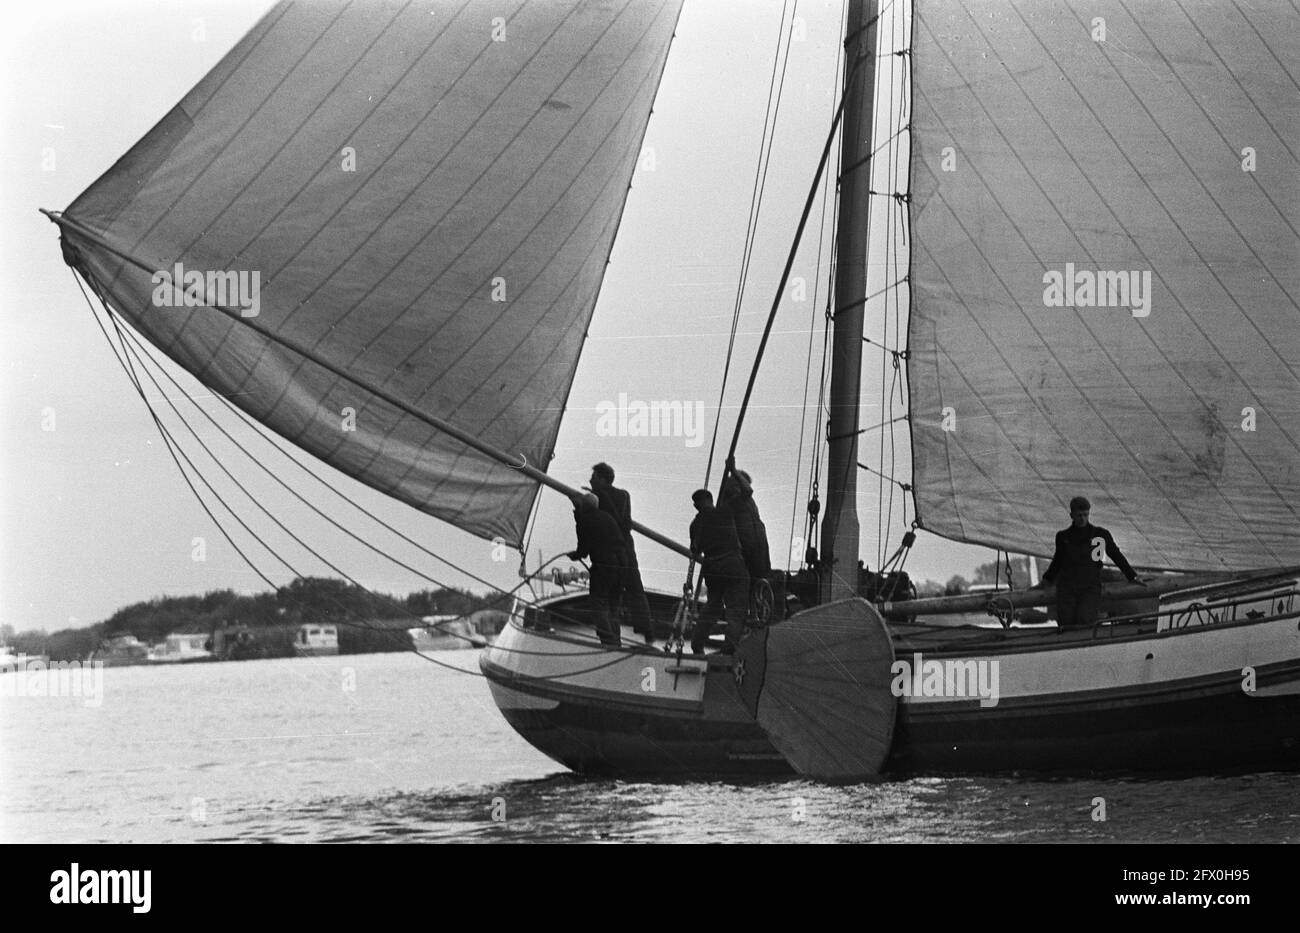 Skutsjesilen on the Frisian waters, going for the wind the skutsjes, July 23rd 1964, Skutsjesilen, The Netherlands, 20th century press agency photo, news to remember, documentary, historic photography 1945-1990, visual stories, human history of the Twentieth Century, capturing moments in time Stock Photo